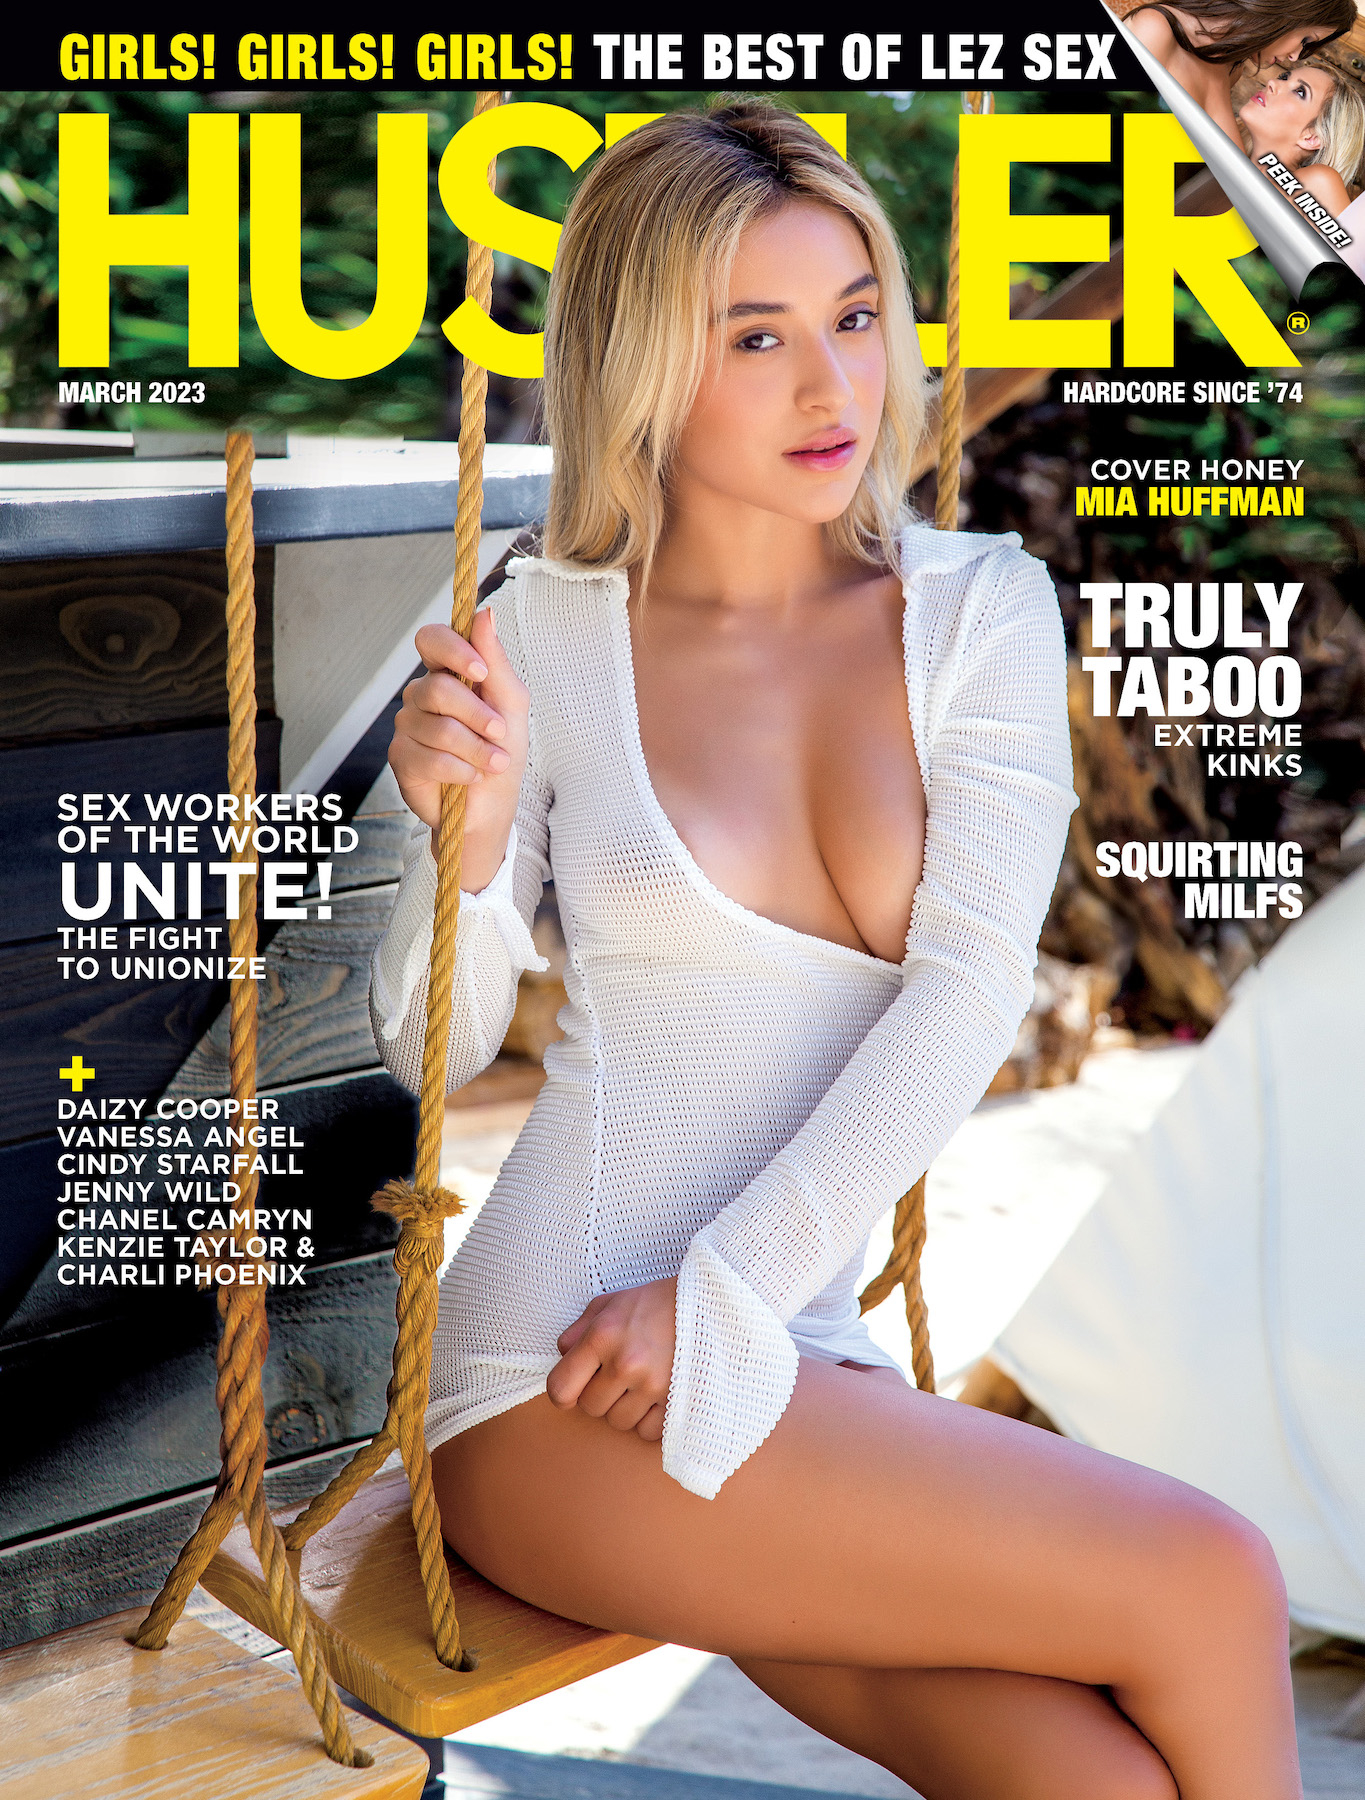 chadi ghanem recommends hustler magazine pictures pic